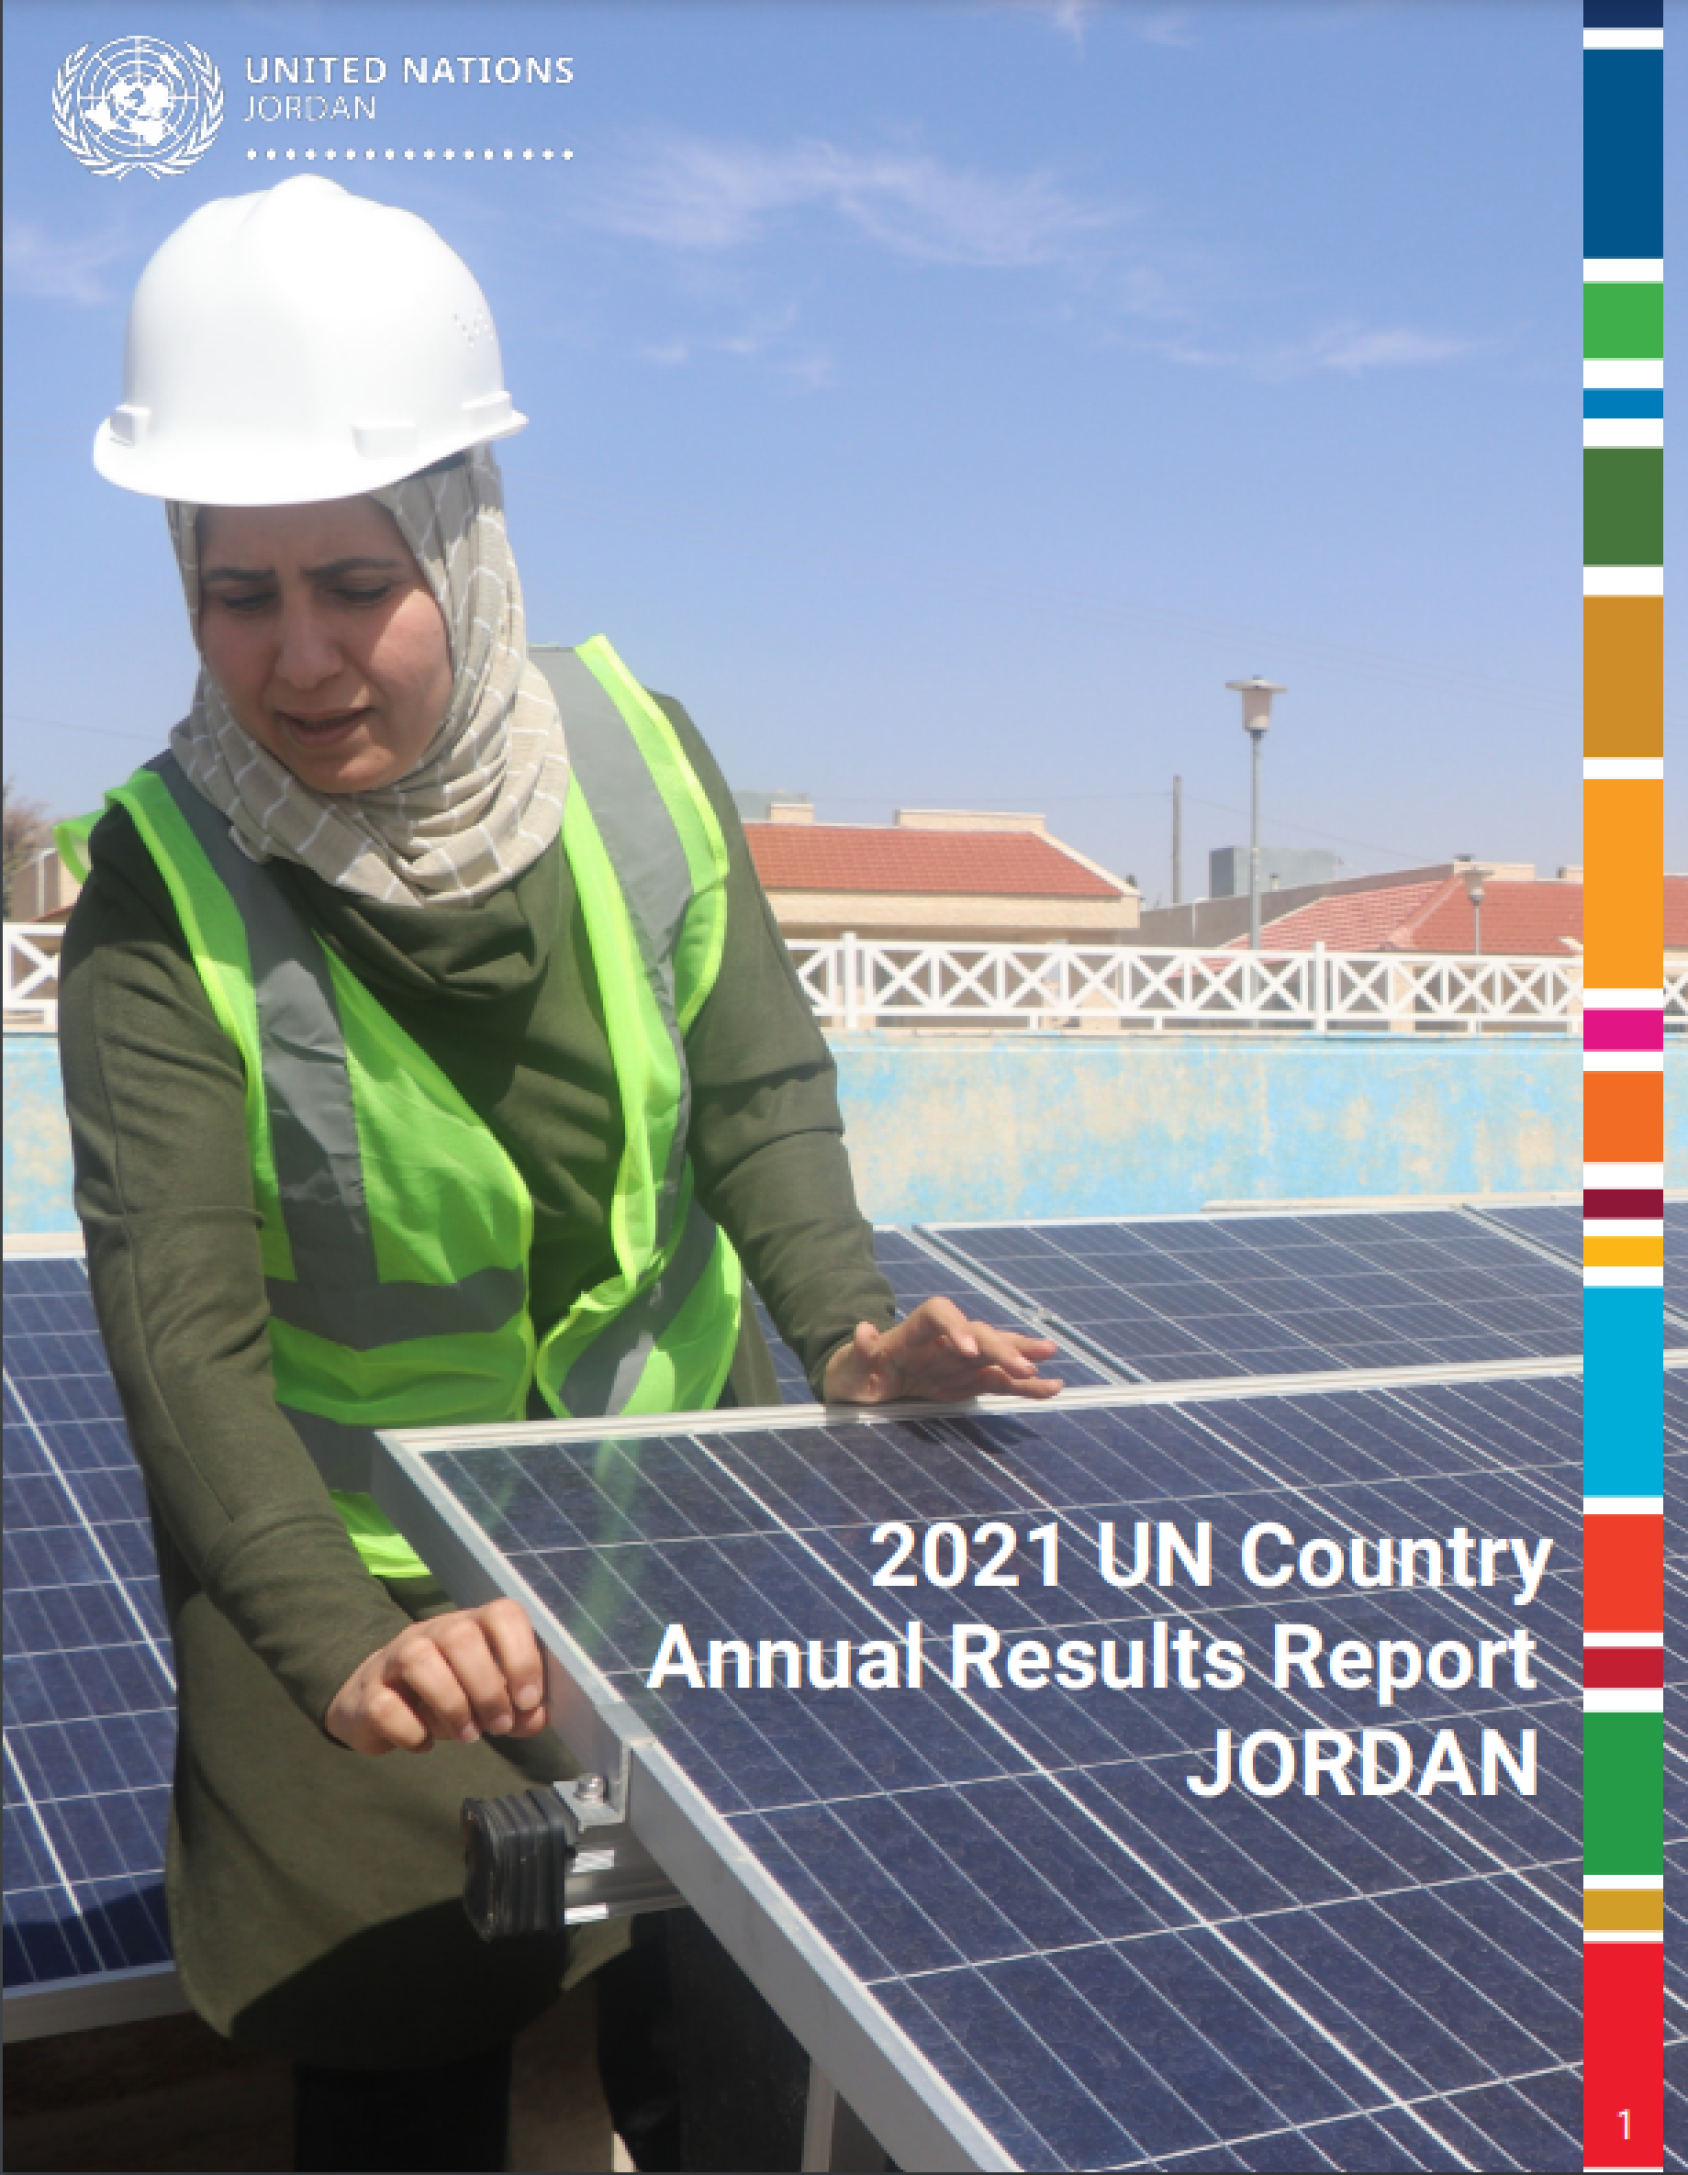 A woman with a white helmet over a head scarf and a bright vest adjusts solar panels on a roof on a sunny day.